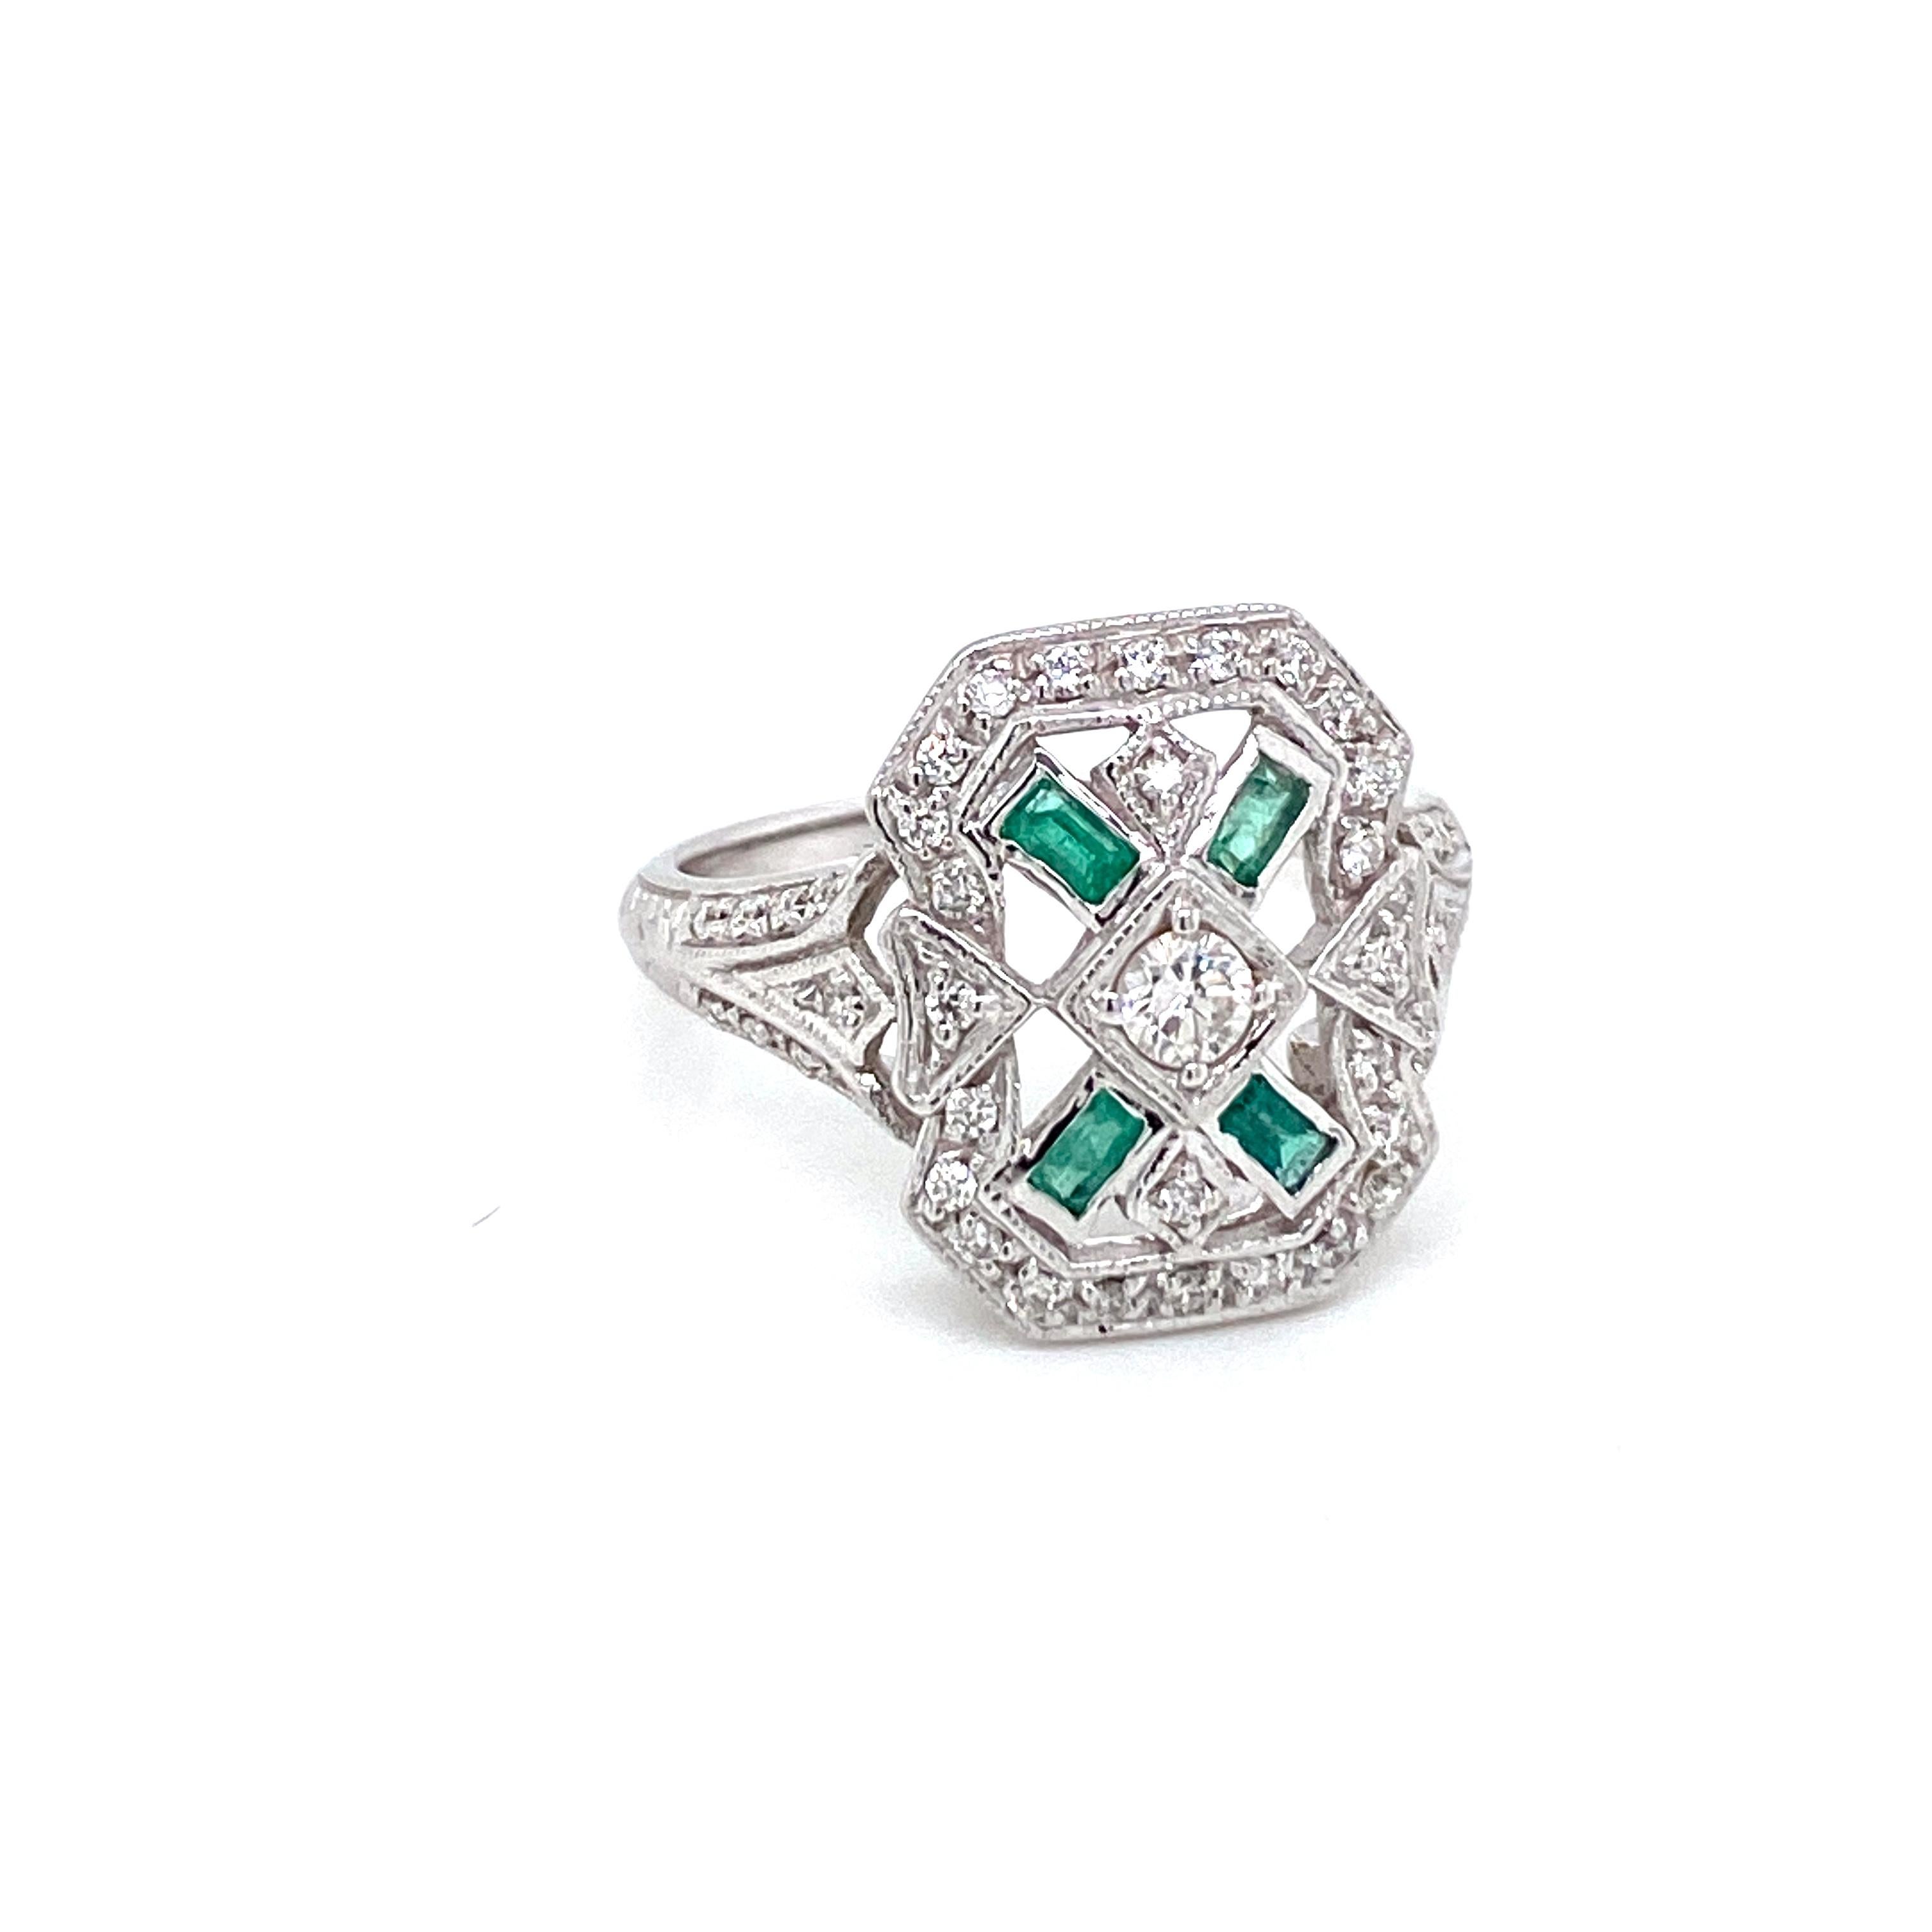 Beautiful Gold handmade Art Deco style ring.
It is set in 14k white Gold featuring Natural Emeralds baguette cut and sparkling Round brilliant cut diamonds, total weight 0,60 ct. G color VVS1 clarity, 
Circa 1980

CONDITION: Pre-owned - Excellent